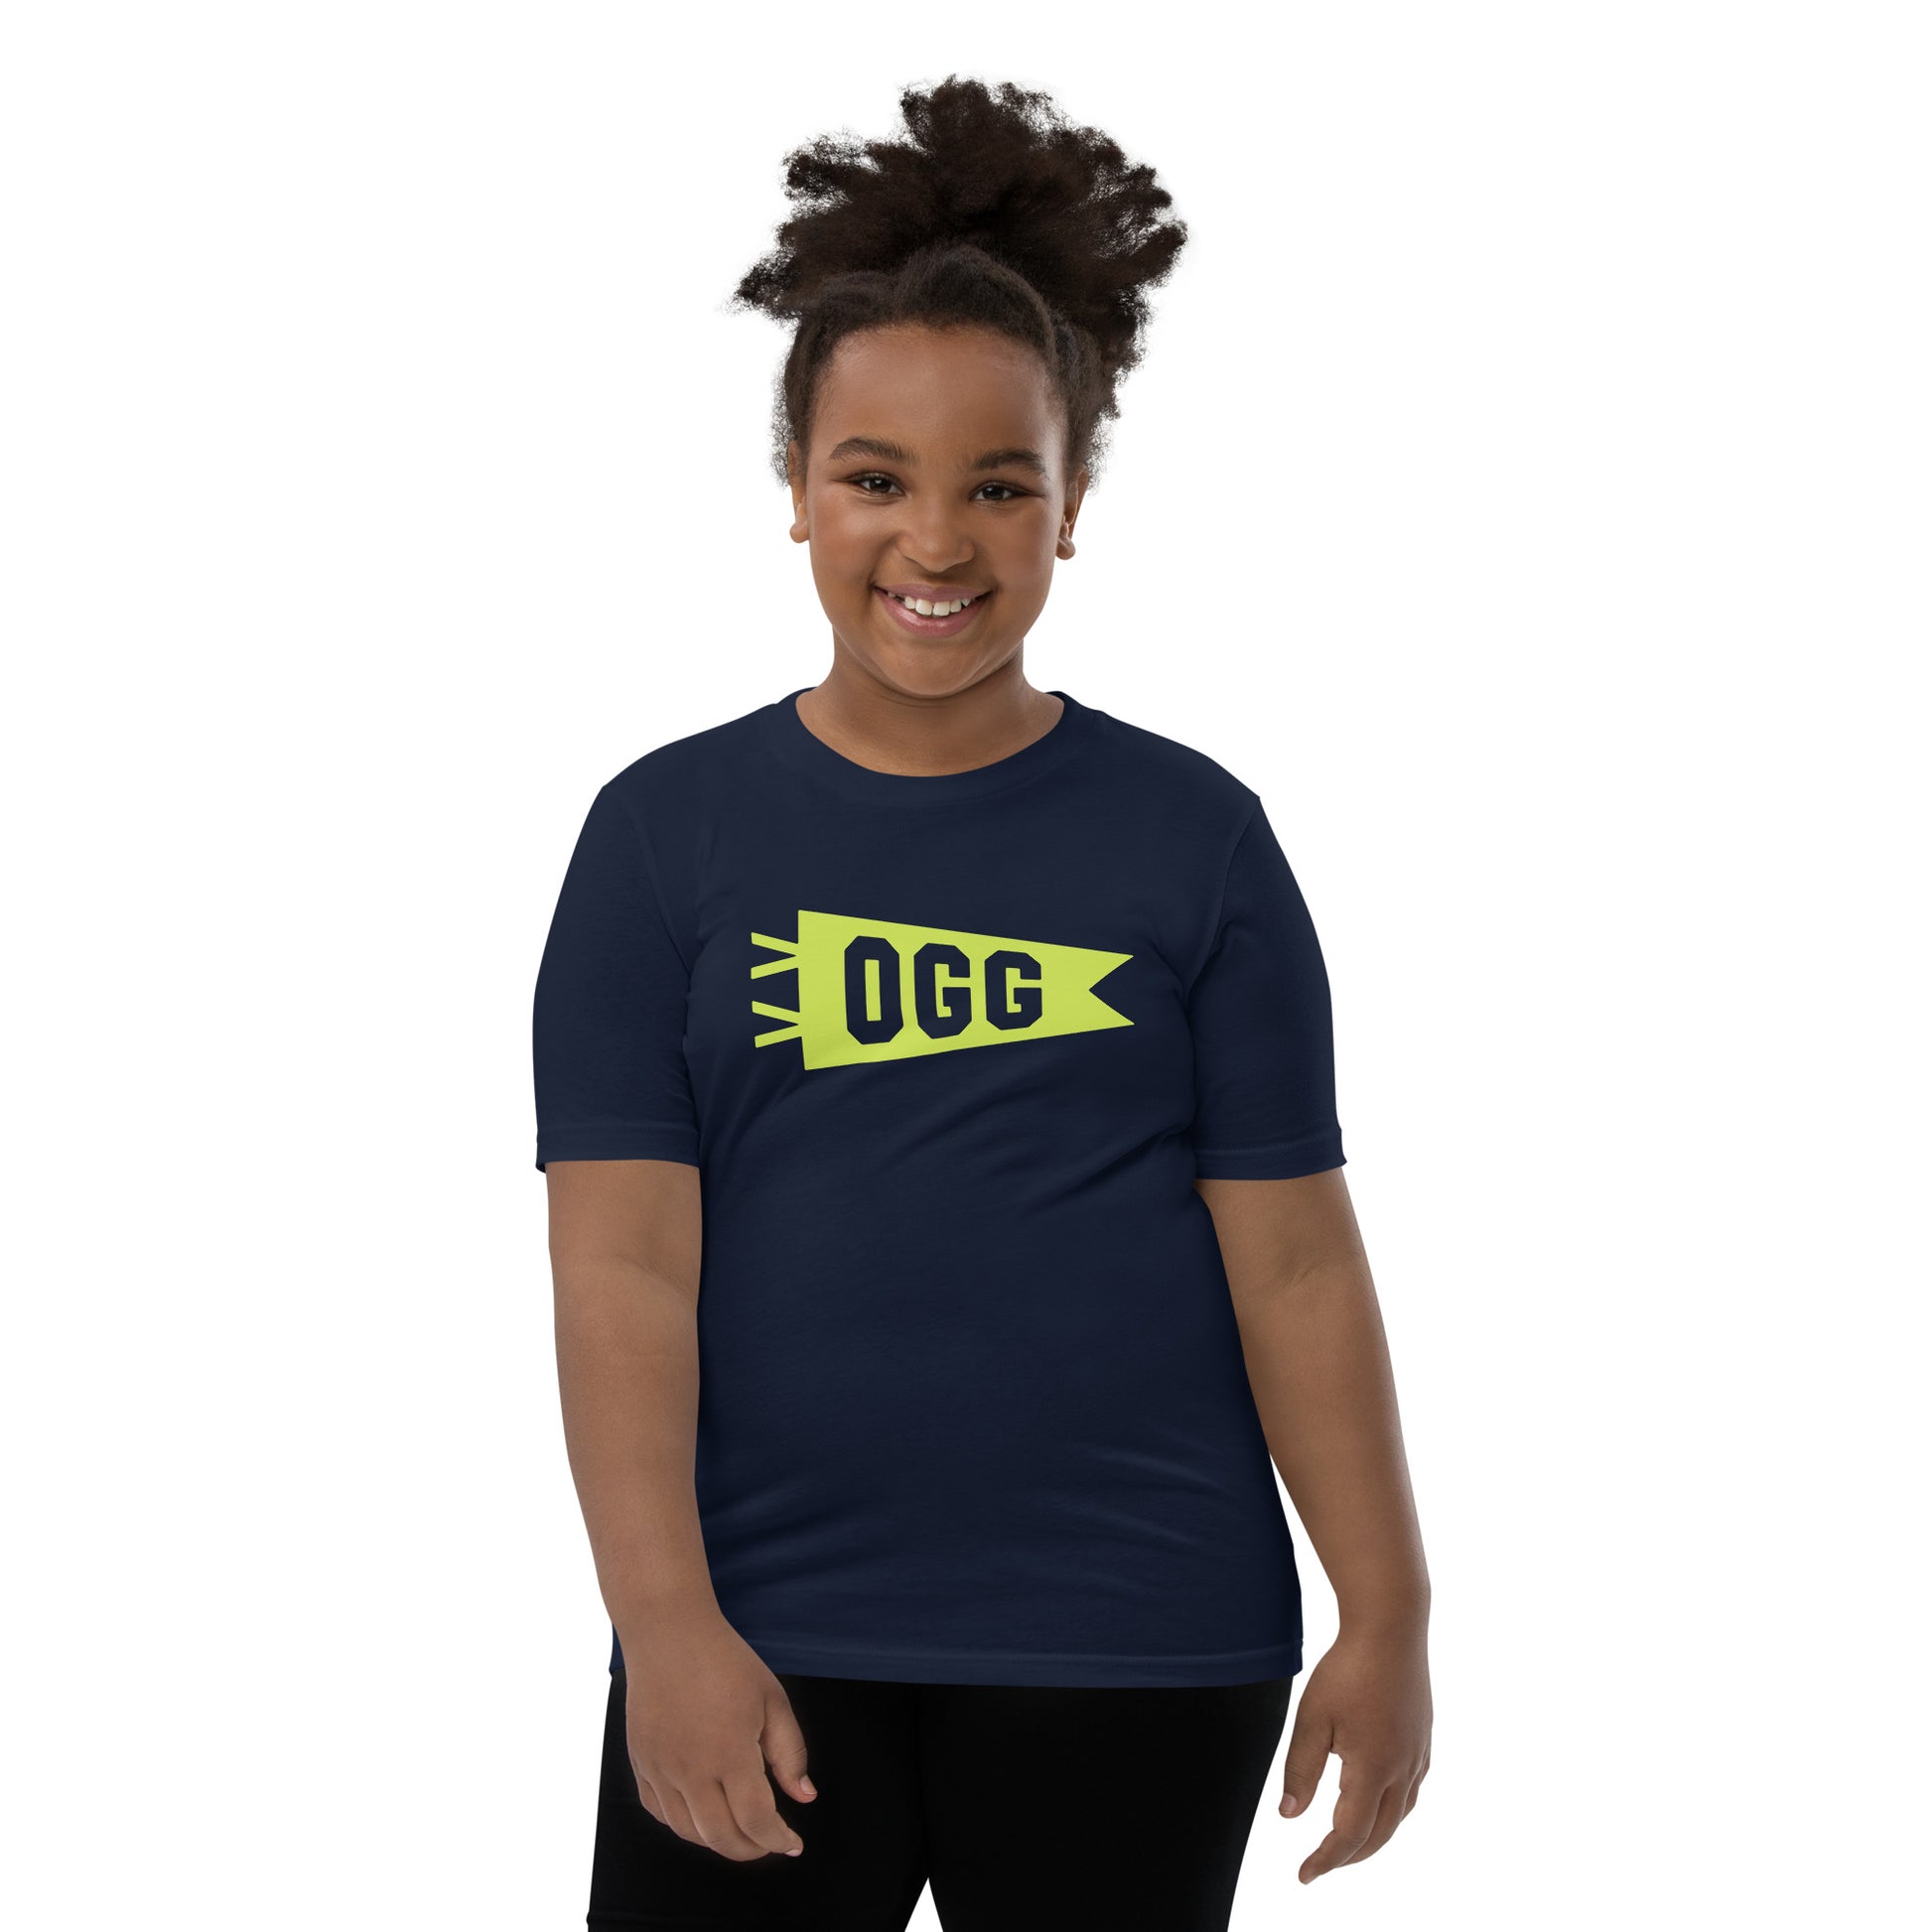 Kid's Airport Code Tee - Green Graphic • OGG Maui • YHM Designs - Image 05